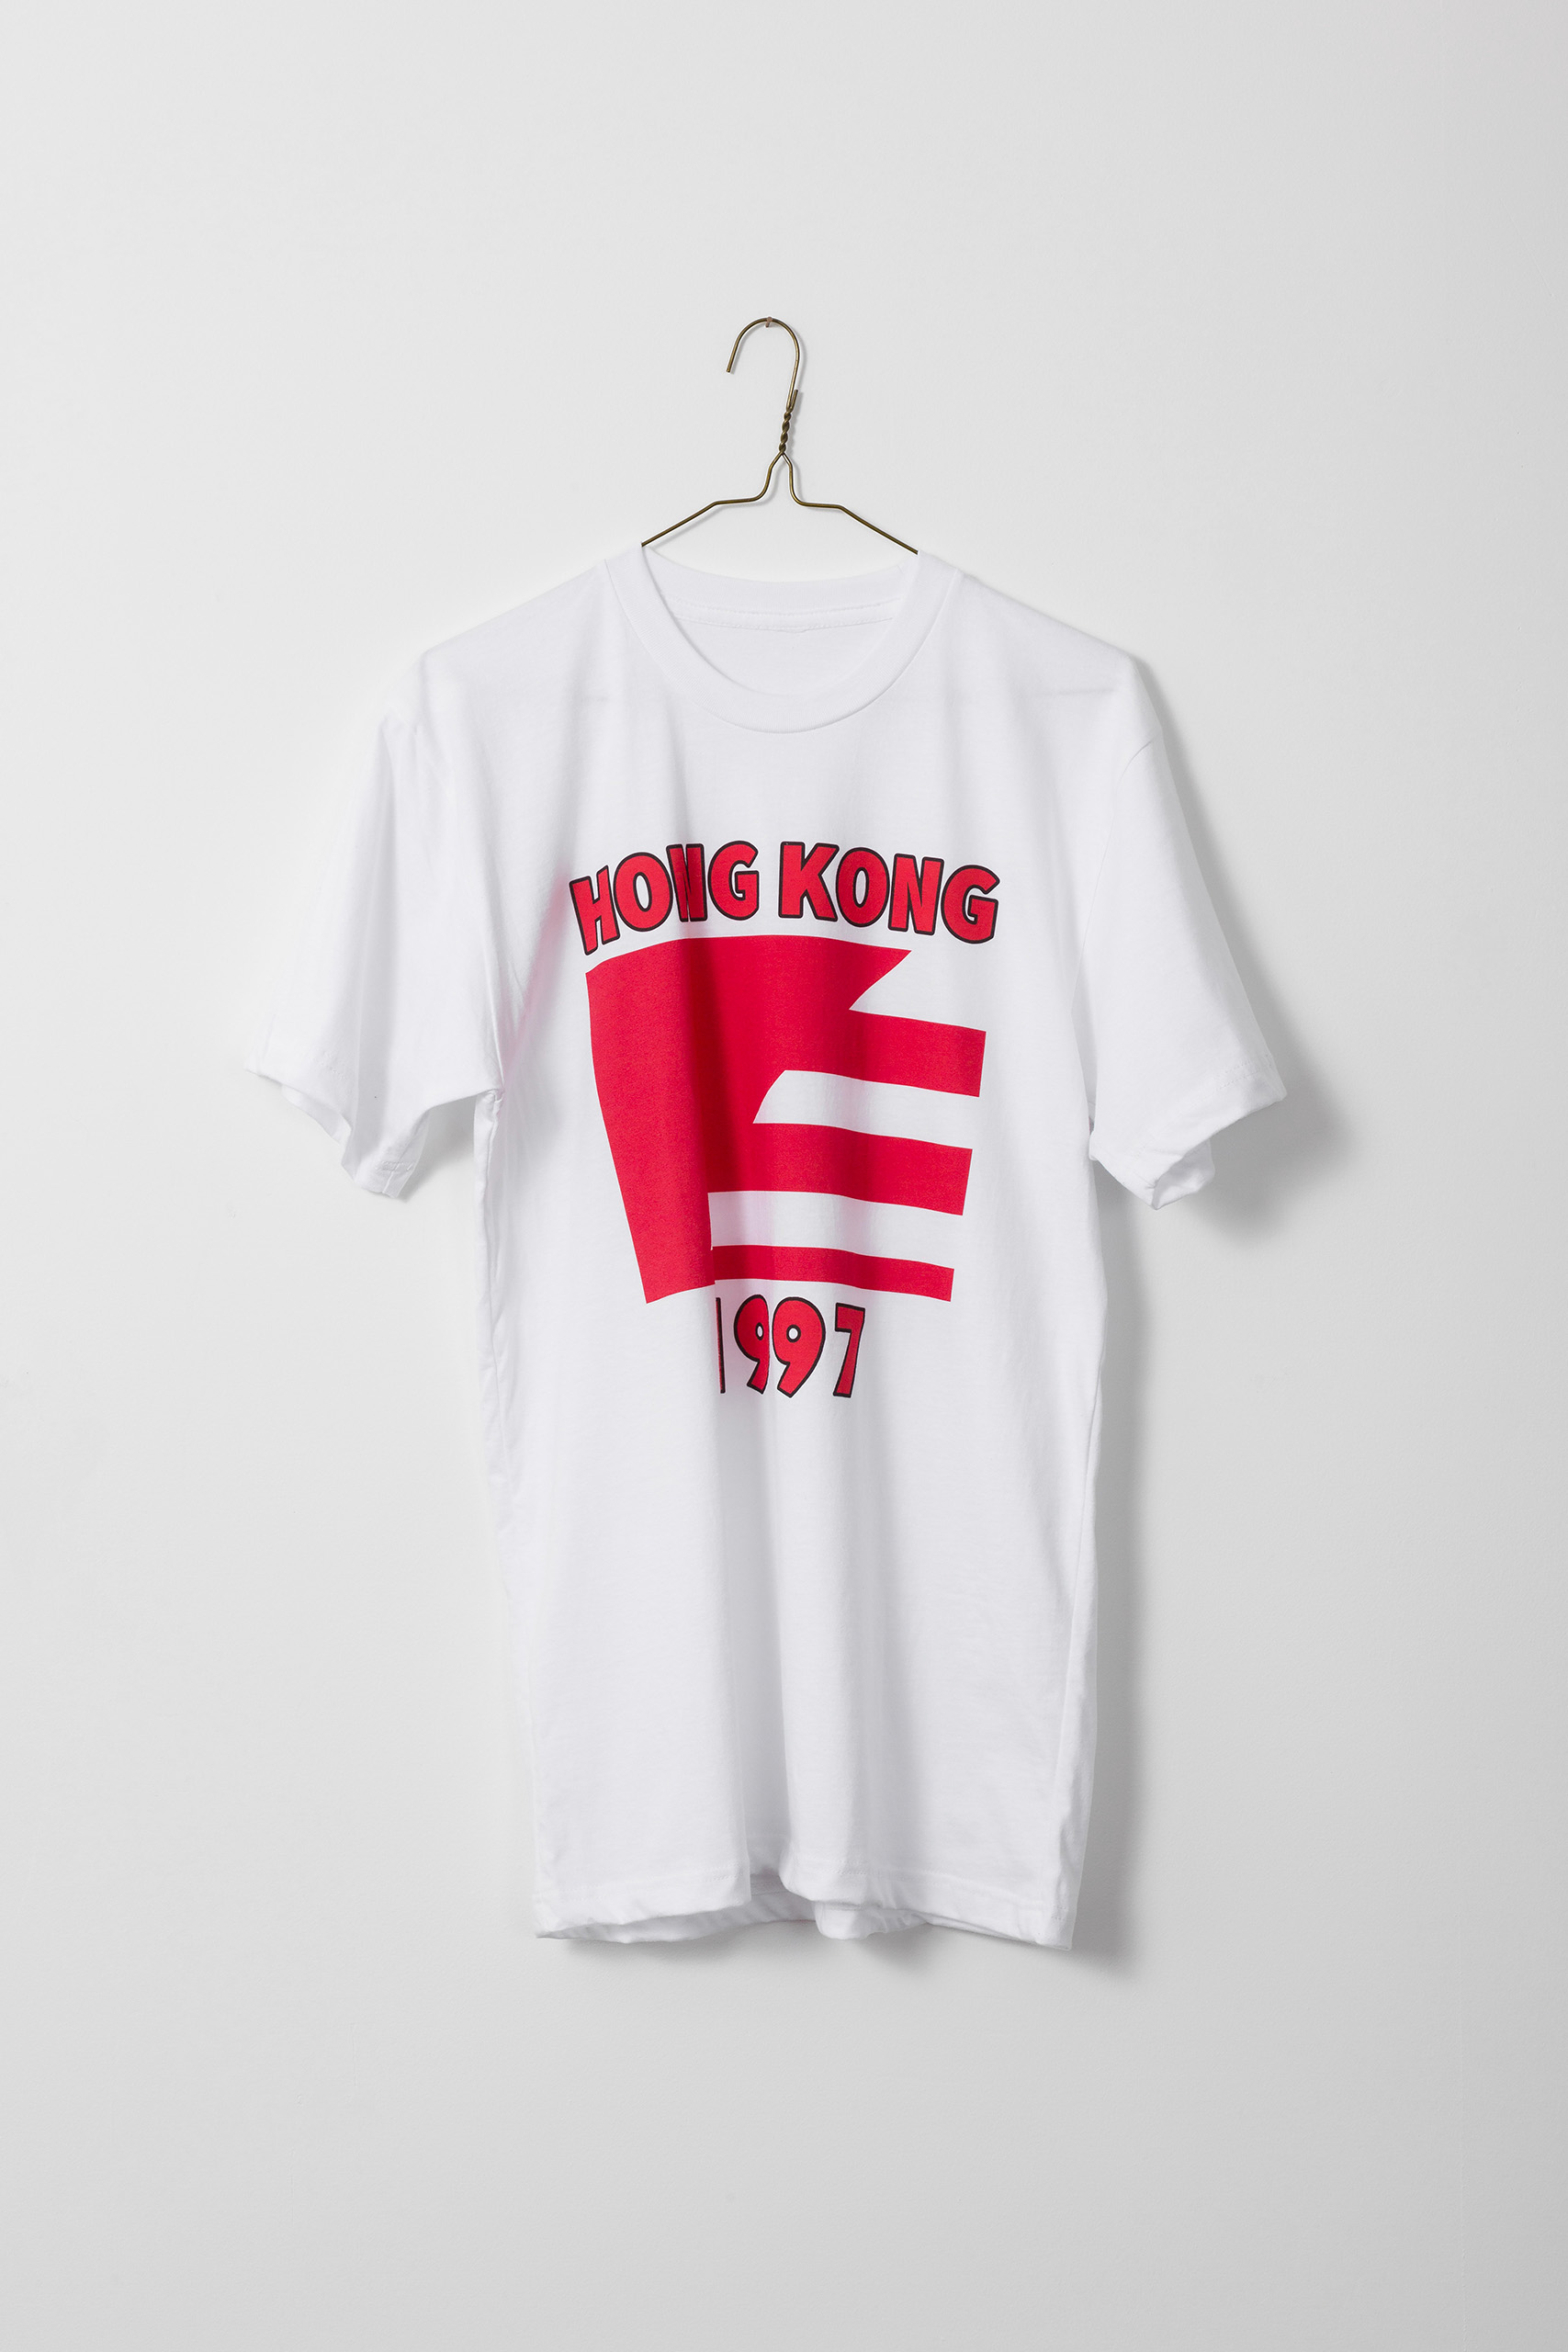 White t-shirt with "Hong Kong" above a flag divided on an angle, half red and half red and white stripes. "1997"